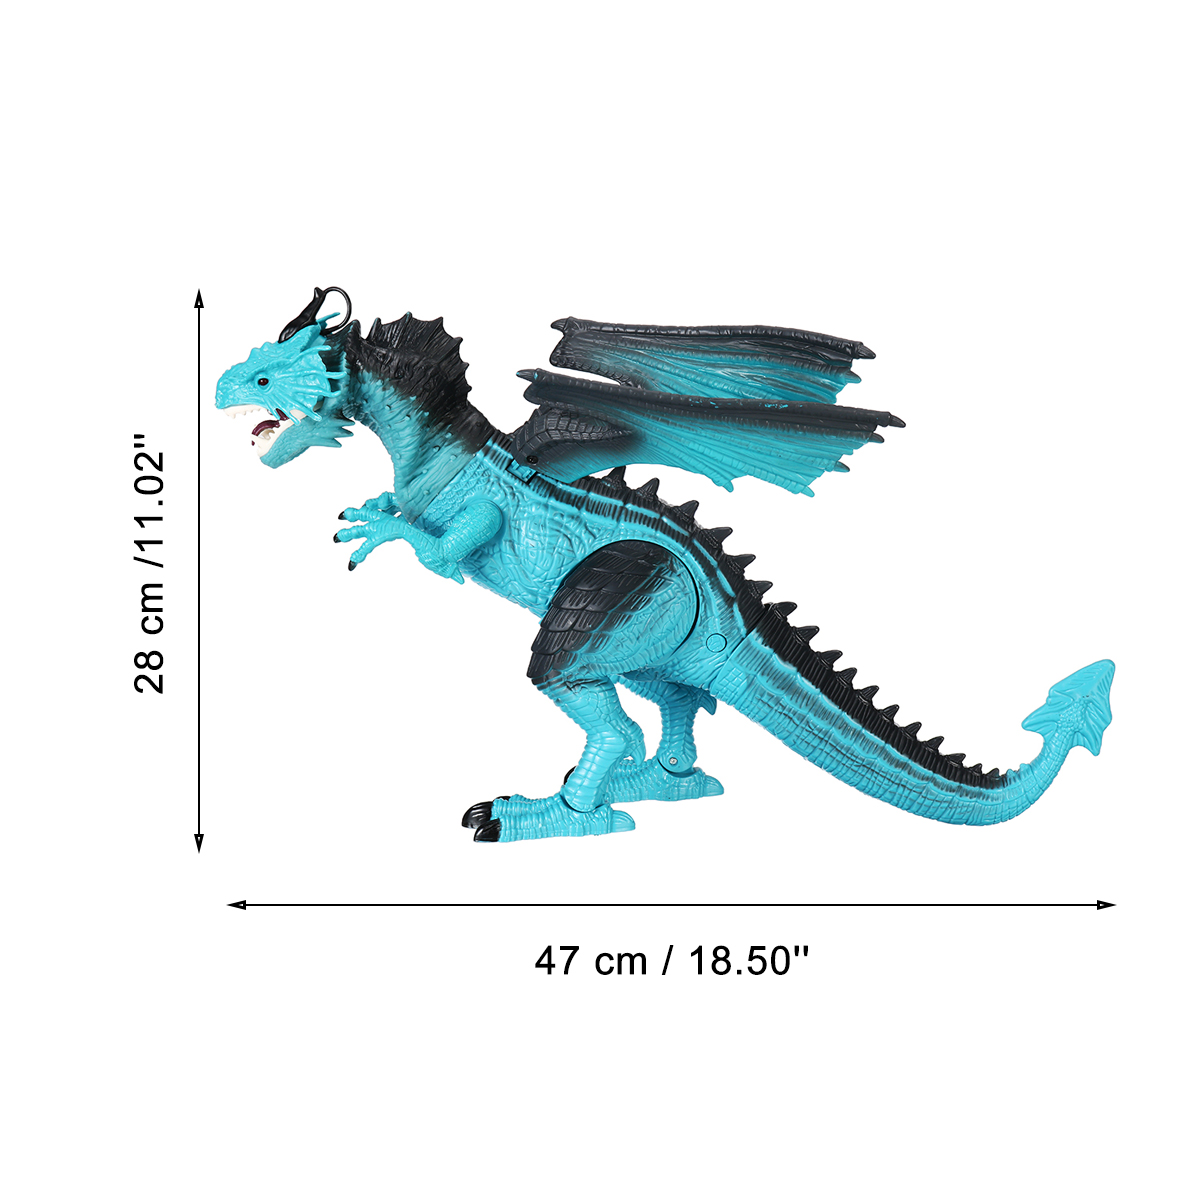 Remote-Control-360deg-Rotate-Spray-Dinosaur-with-Sound-LED-Light-and-Simulate-Flame-Diecast-Model-To-1773231-10